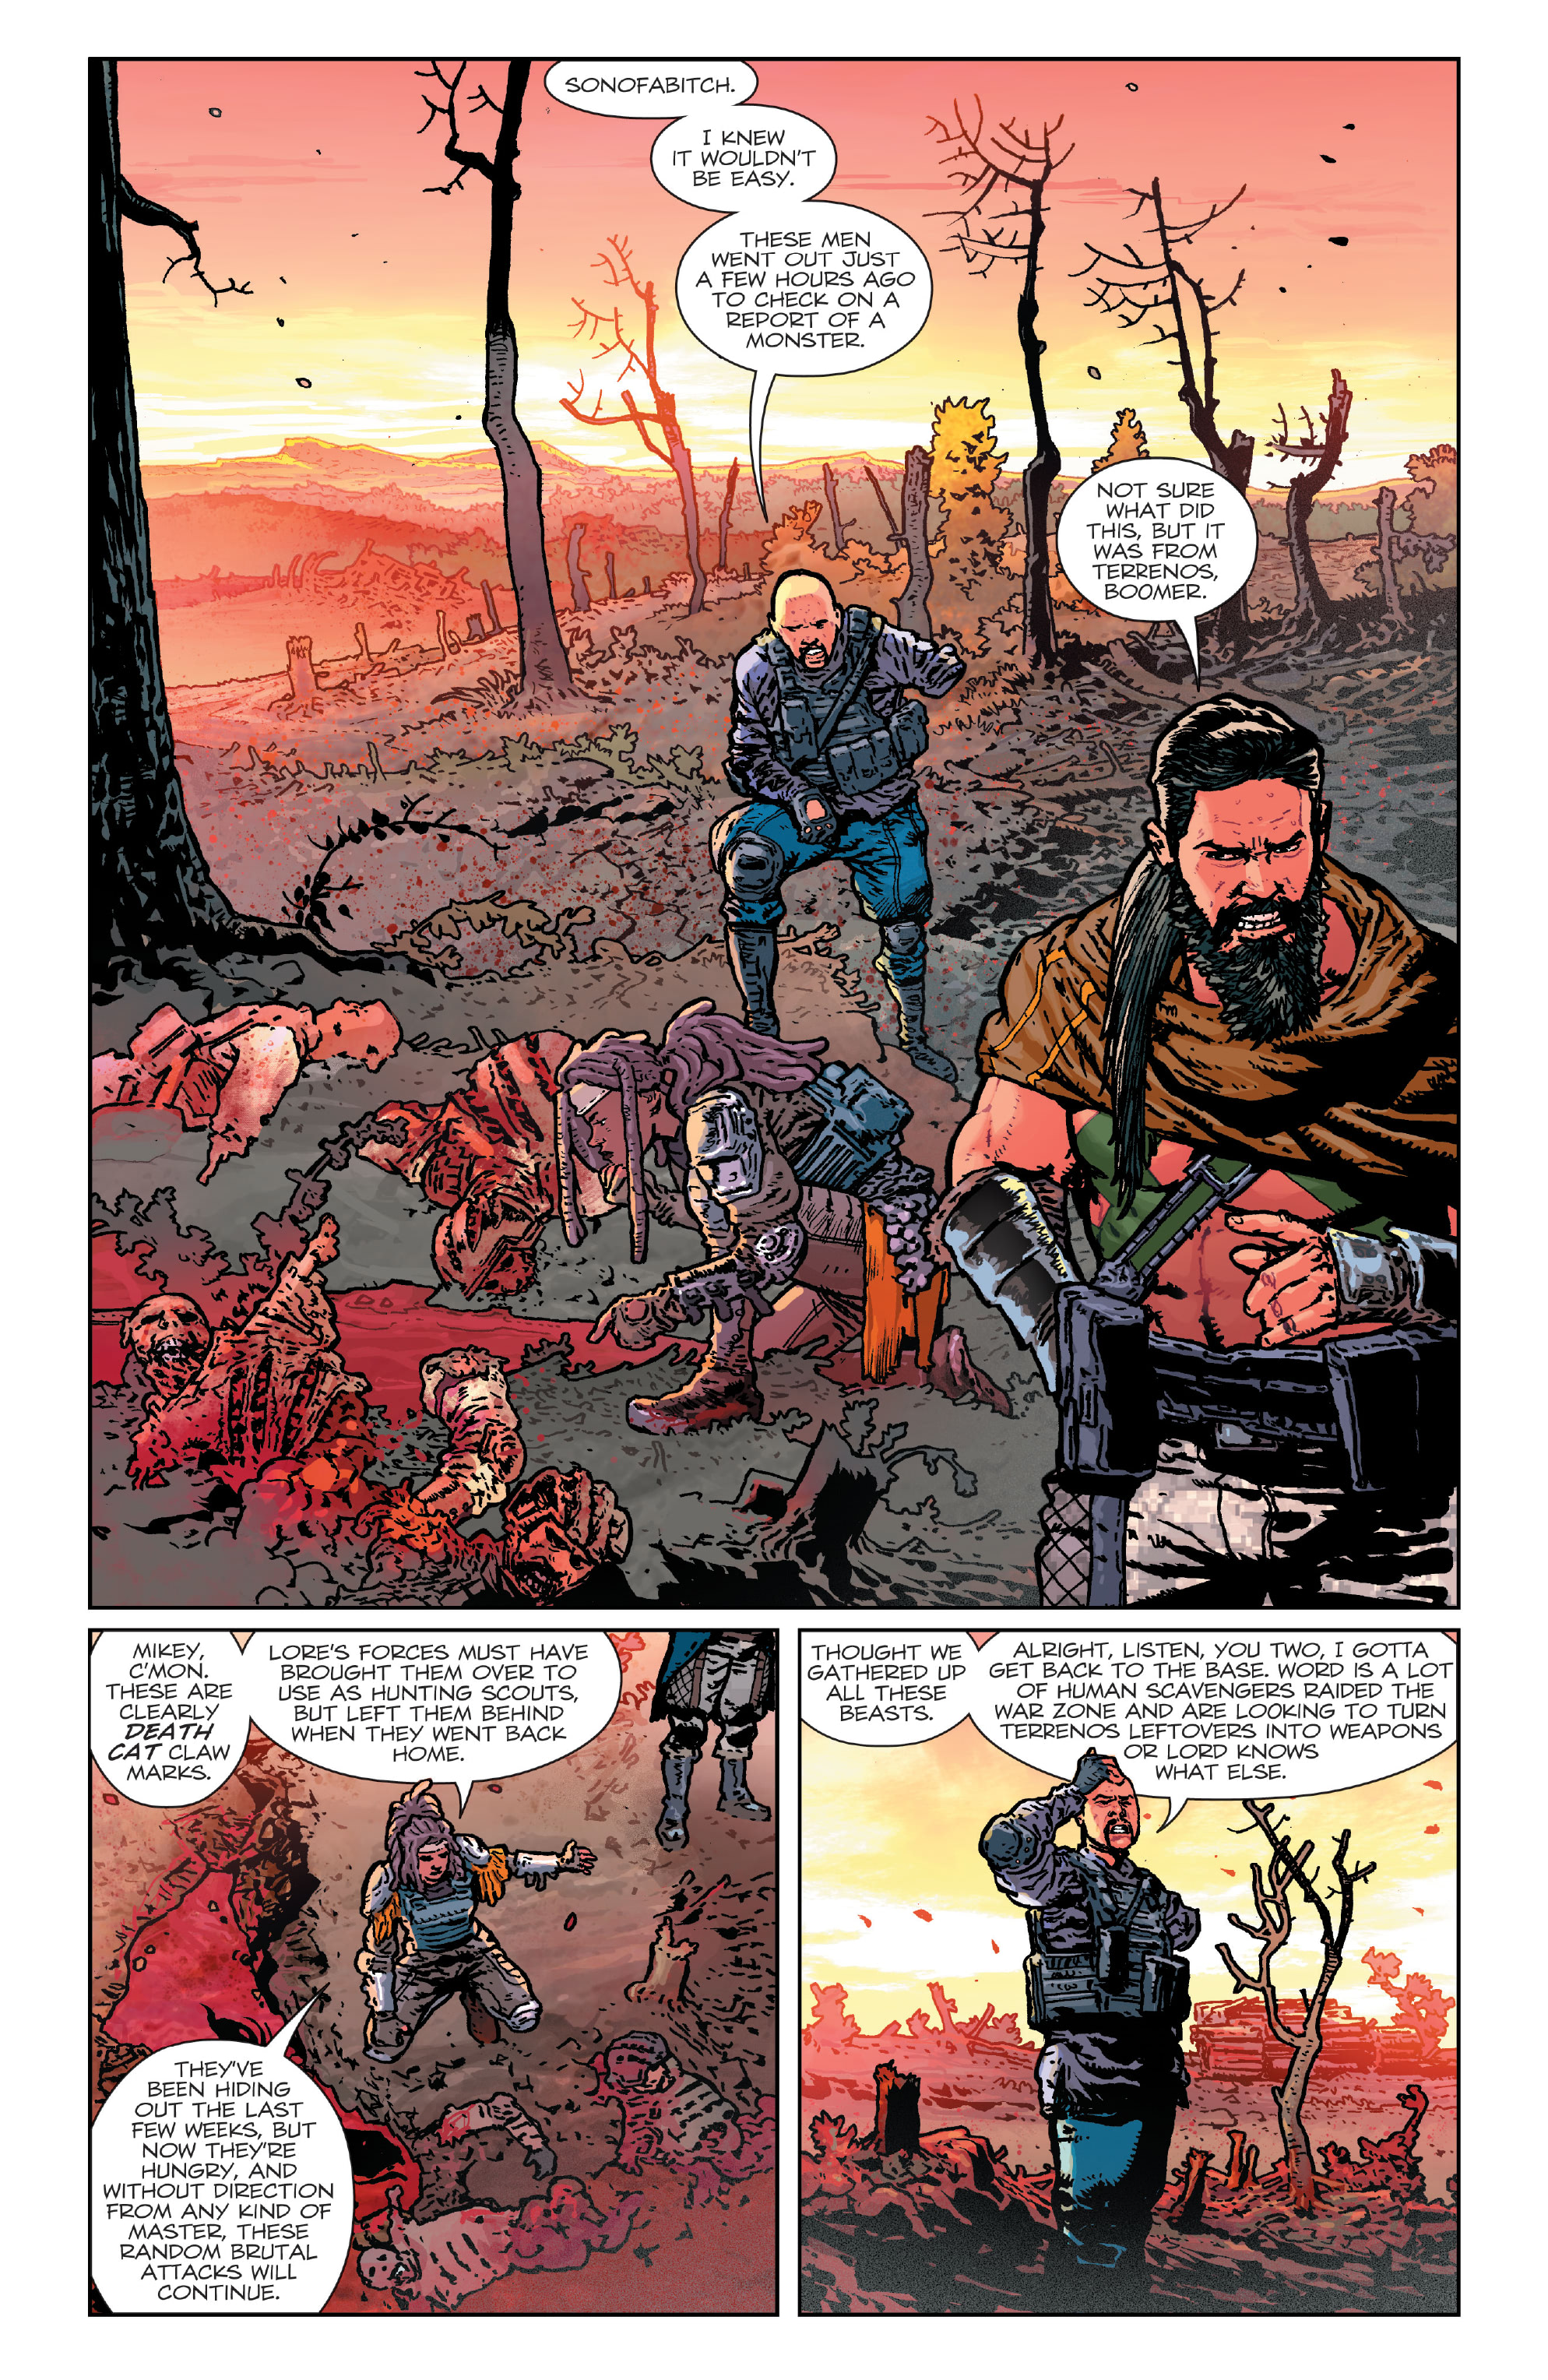 Birthright (2014-): Chapter 46 - Page 4